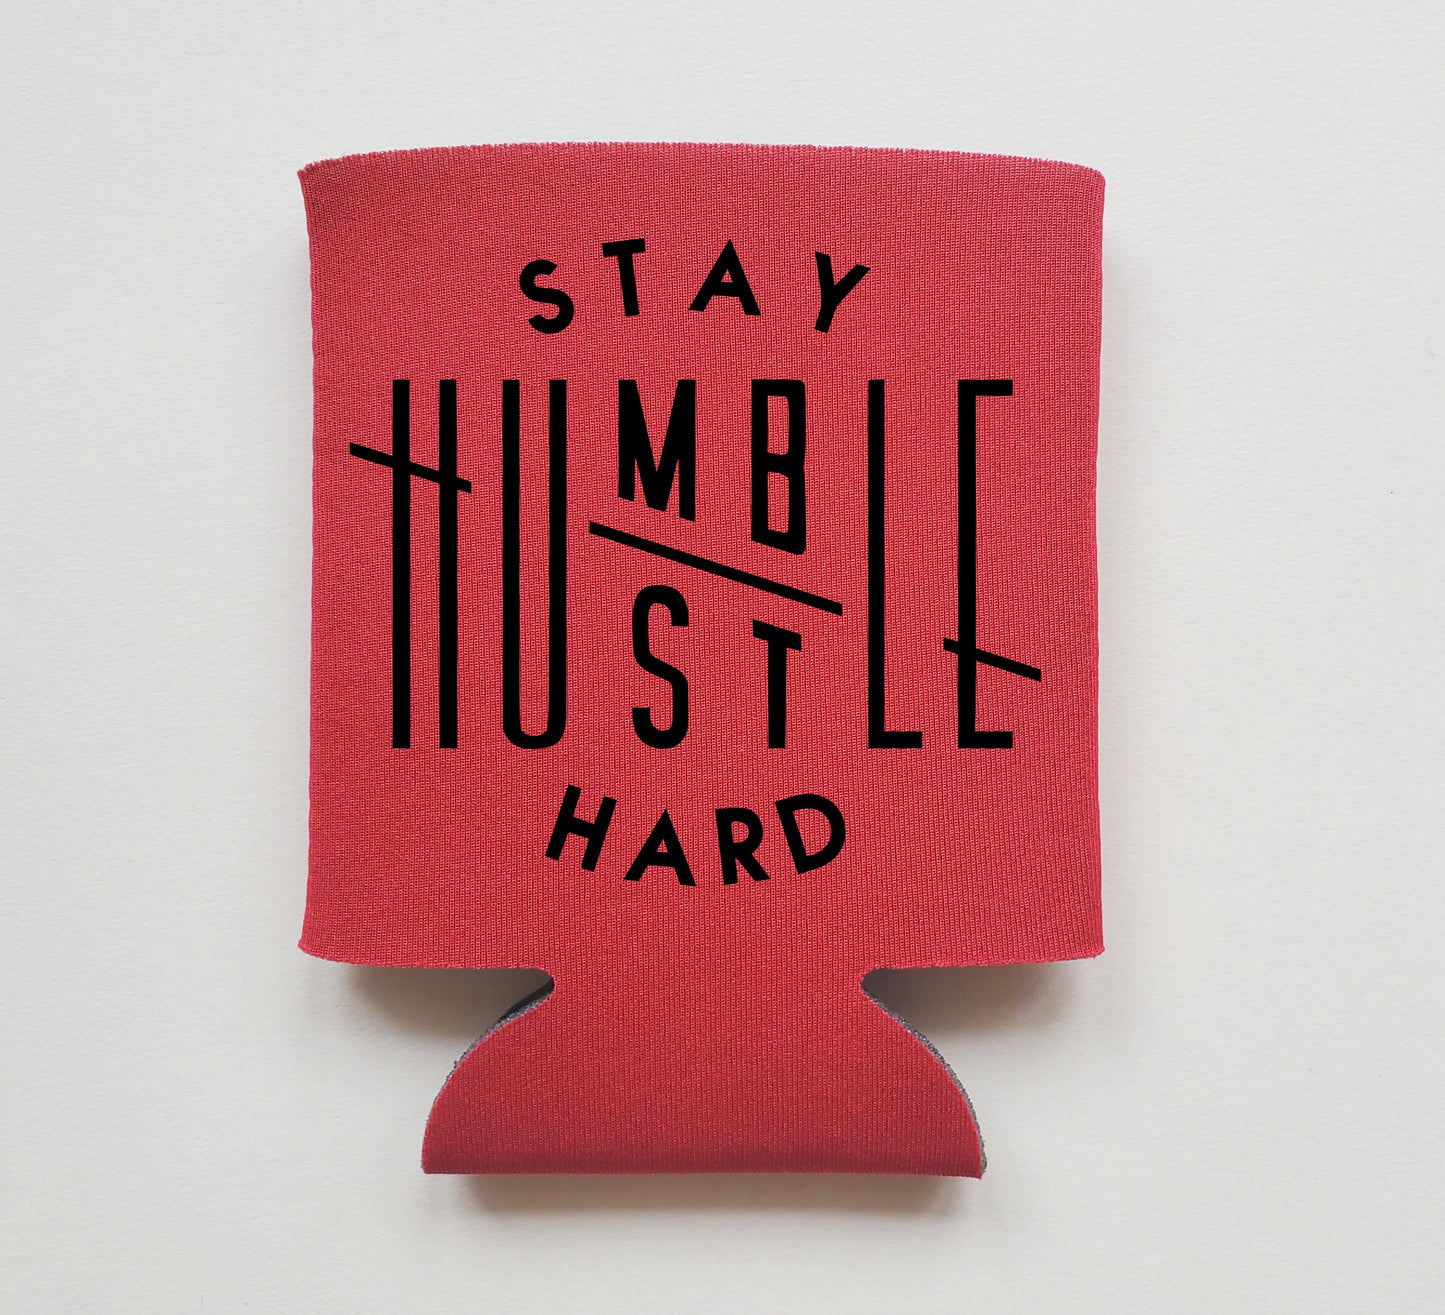 Stay Humble / Hustle Hard - Drink Cozie, Can Cooler